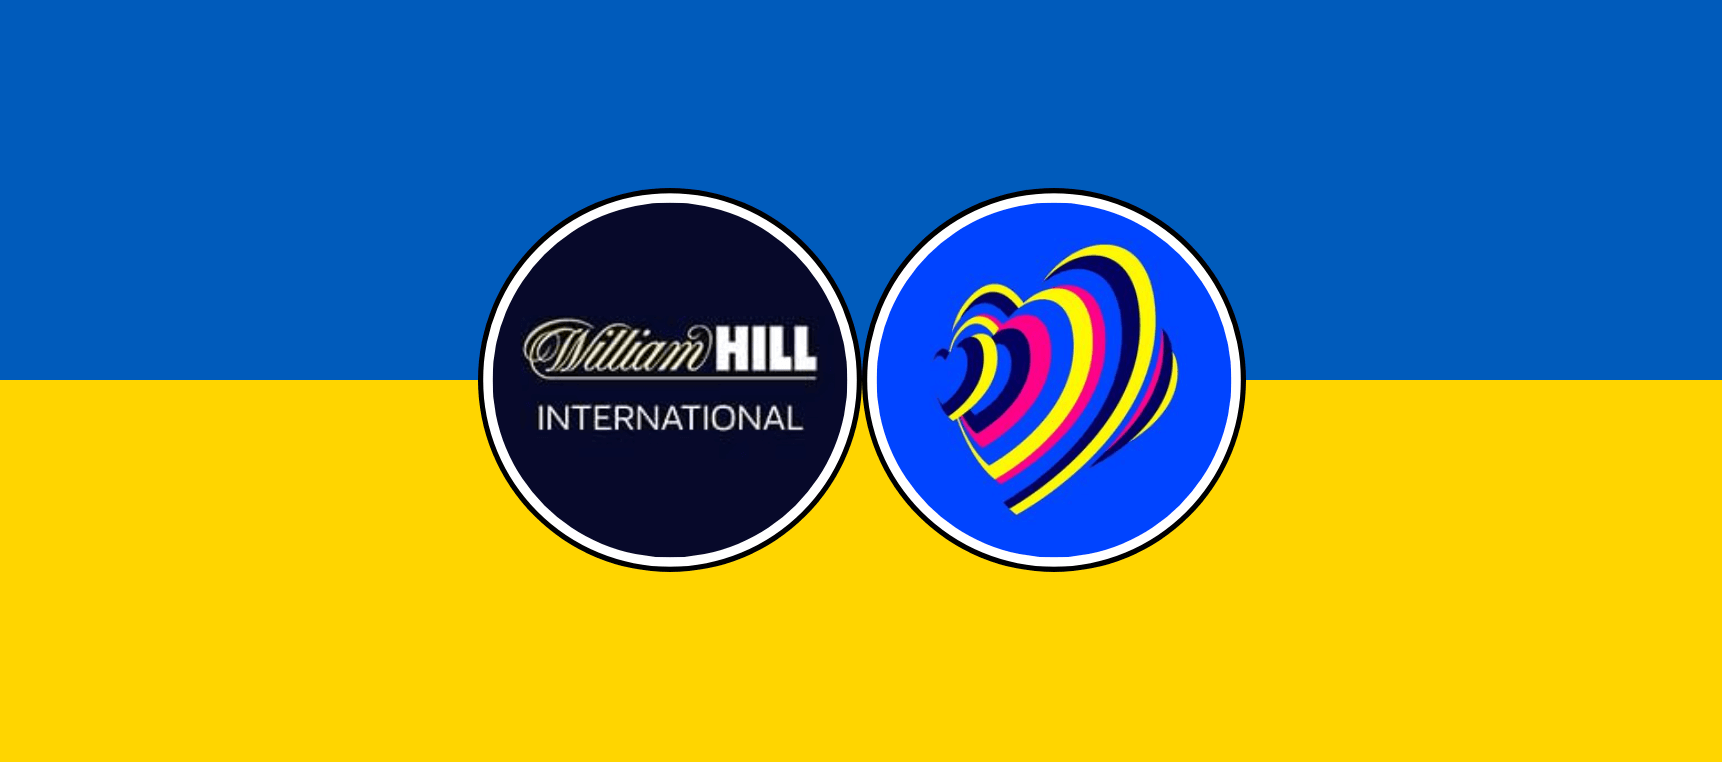 William Hill to donate Eurovision profits to Support Ukraine charity